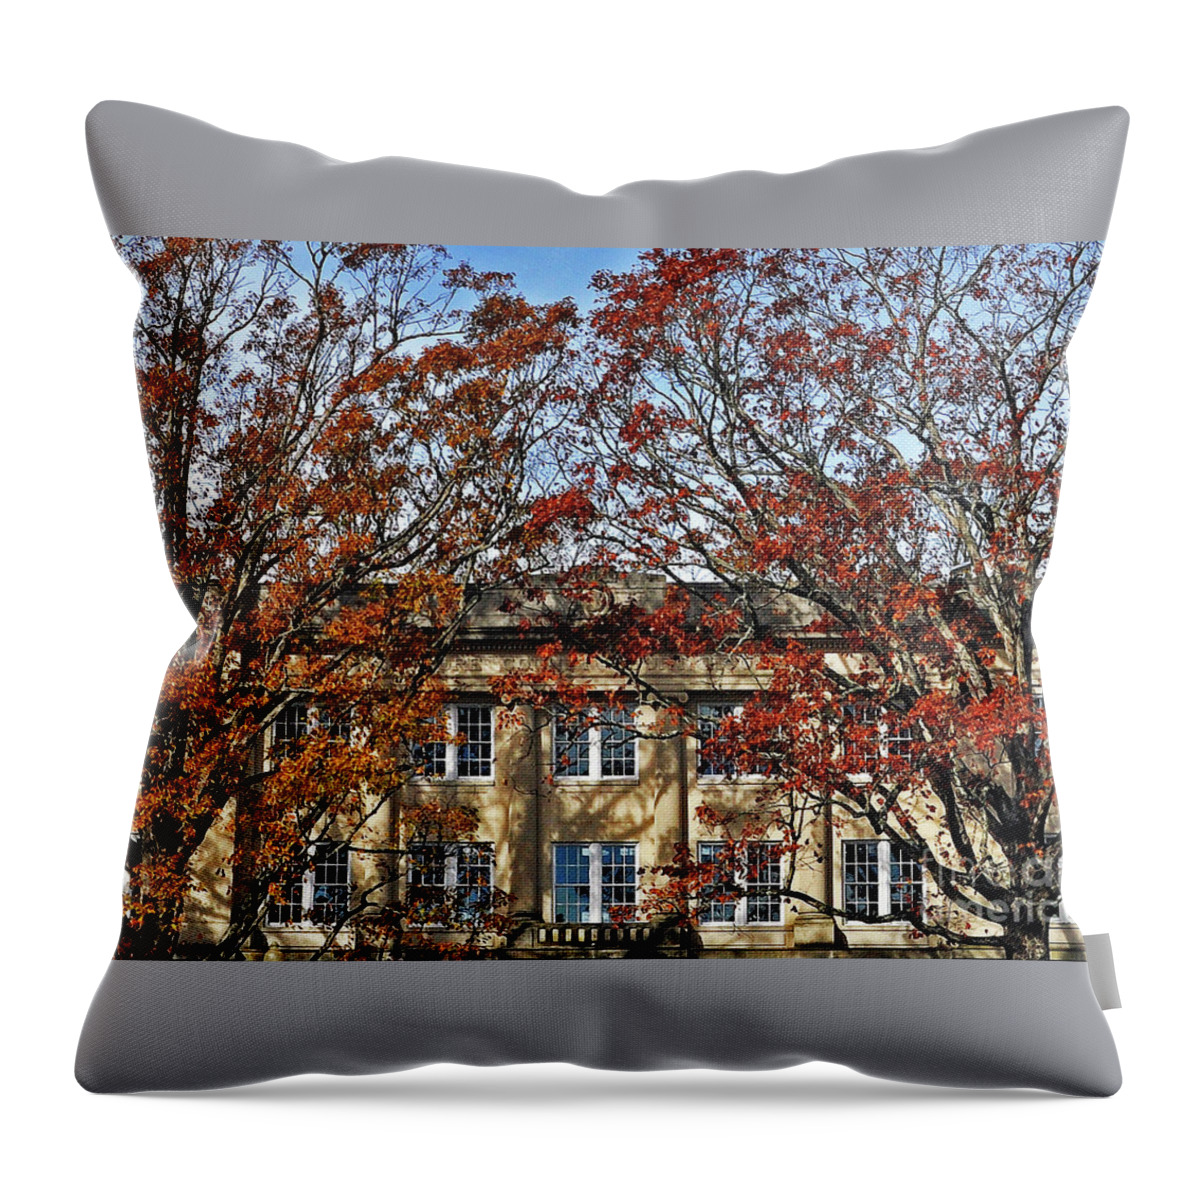 Courthouse Throw Pillow featuring the photograph Moore County Courthouse In Autumn by Lydia Holly